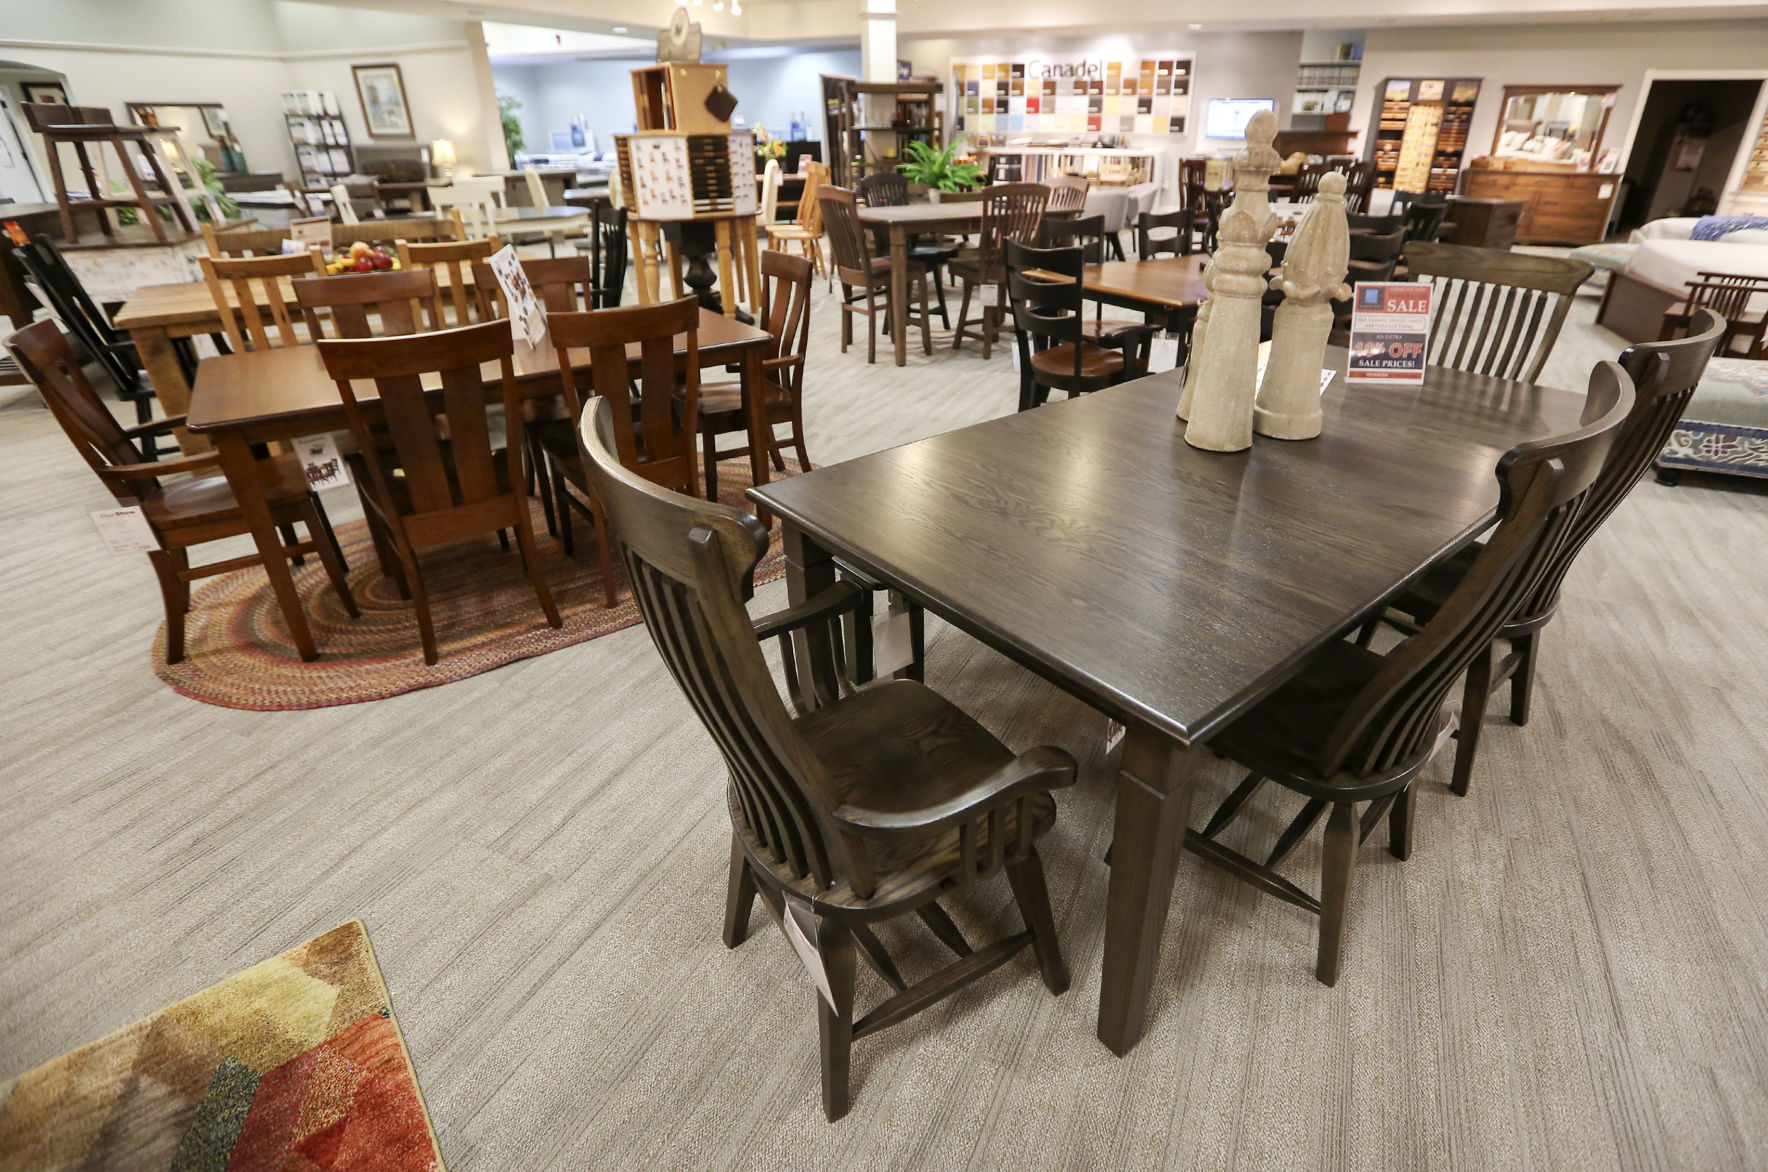 Dining display at FloorShow Furniture & Flooring in Dubuque on Friday, Oct. 4, 2019. FloorShow will have a branding change on Monday, when the company will officially become known as Home + Floor Show. PHOTO CREDIT: NICKI KOHL